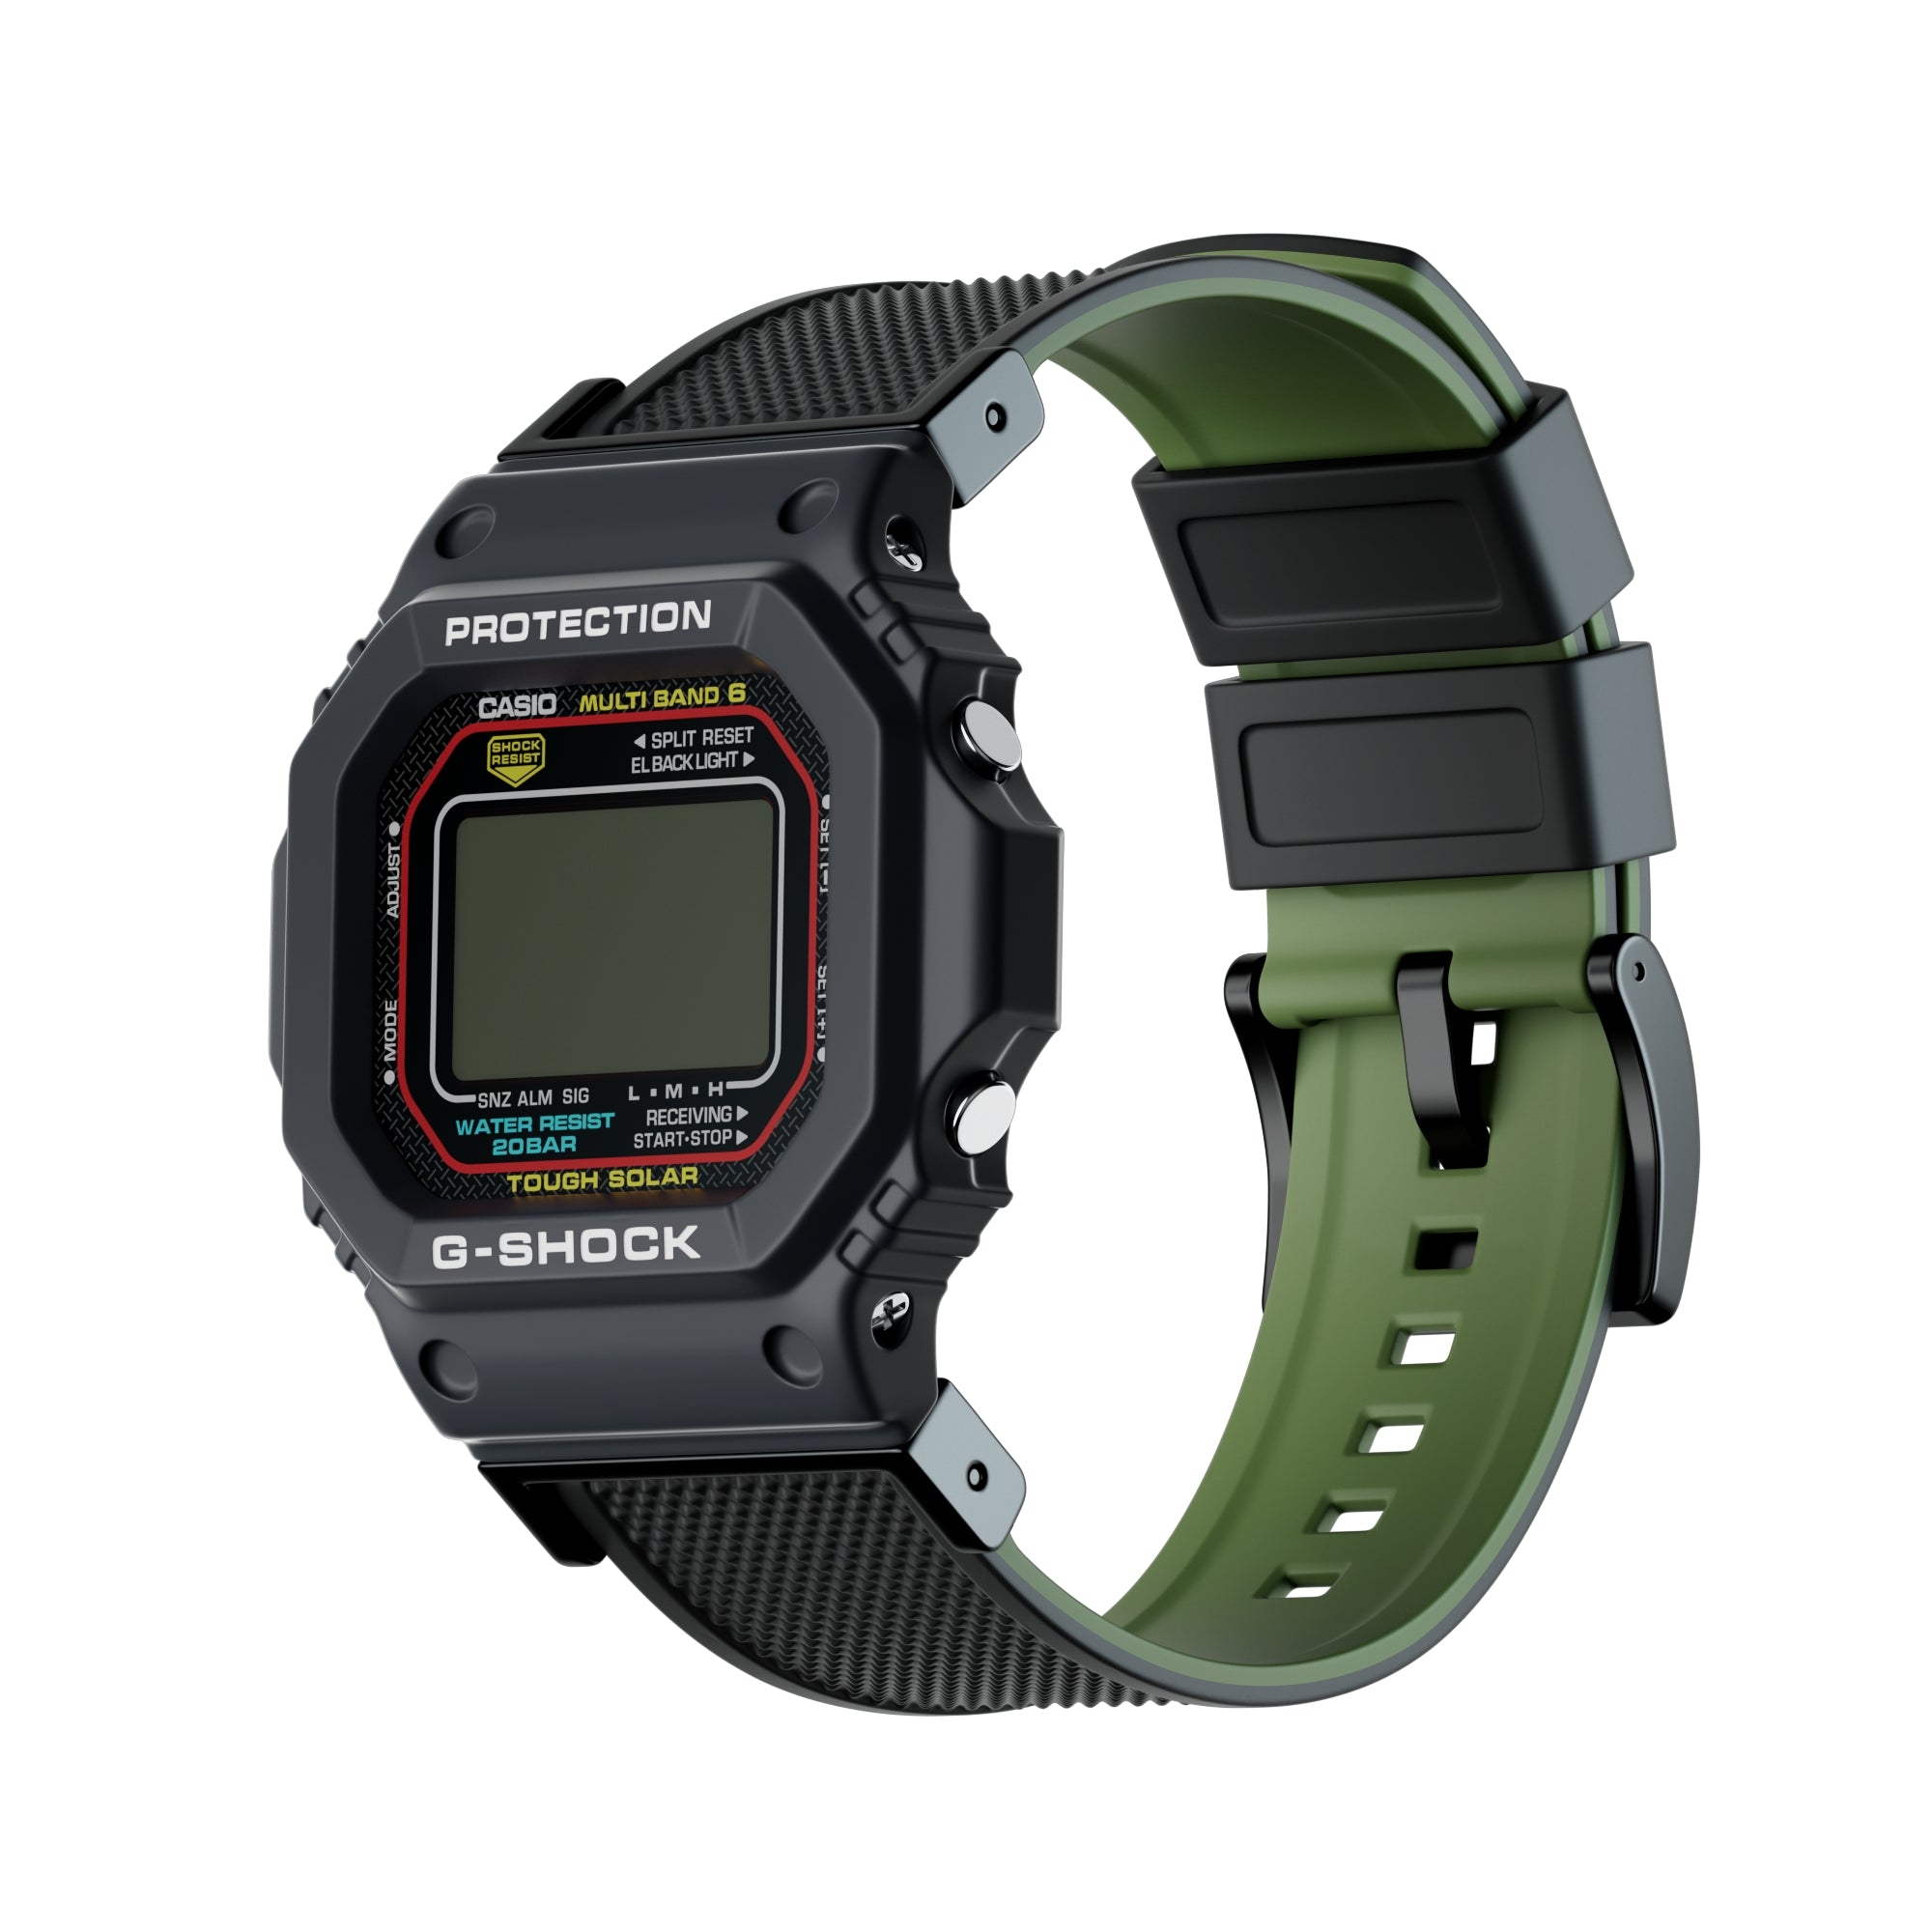 MATTE BLACK RESIN BAND 10347688  GSHOCK  Casio Service and Spares  Australia